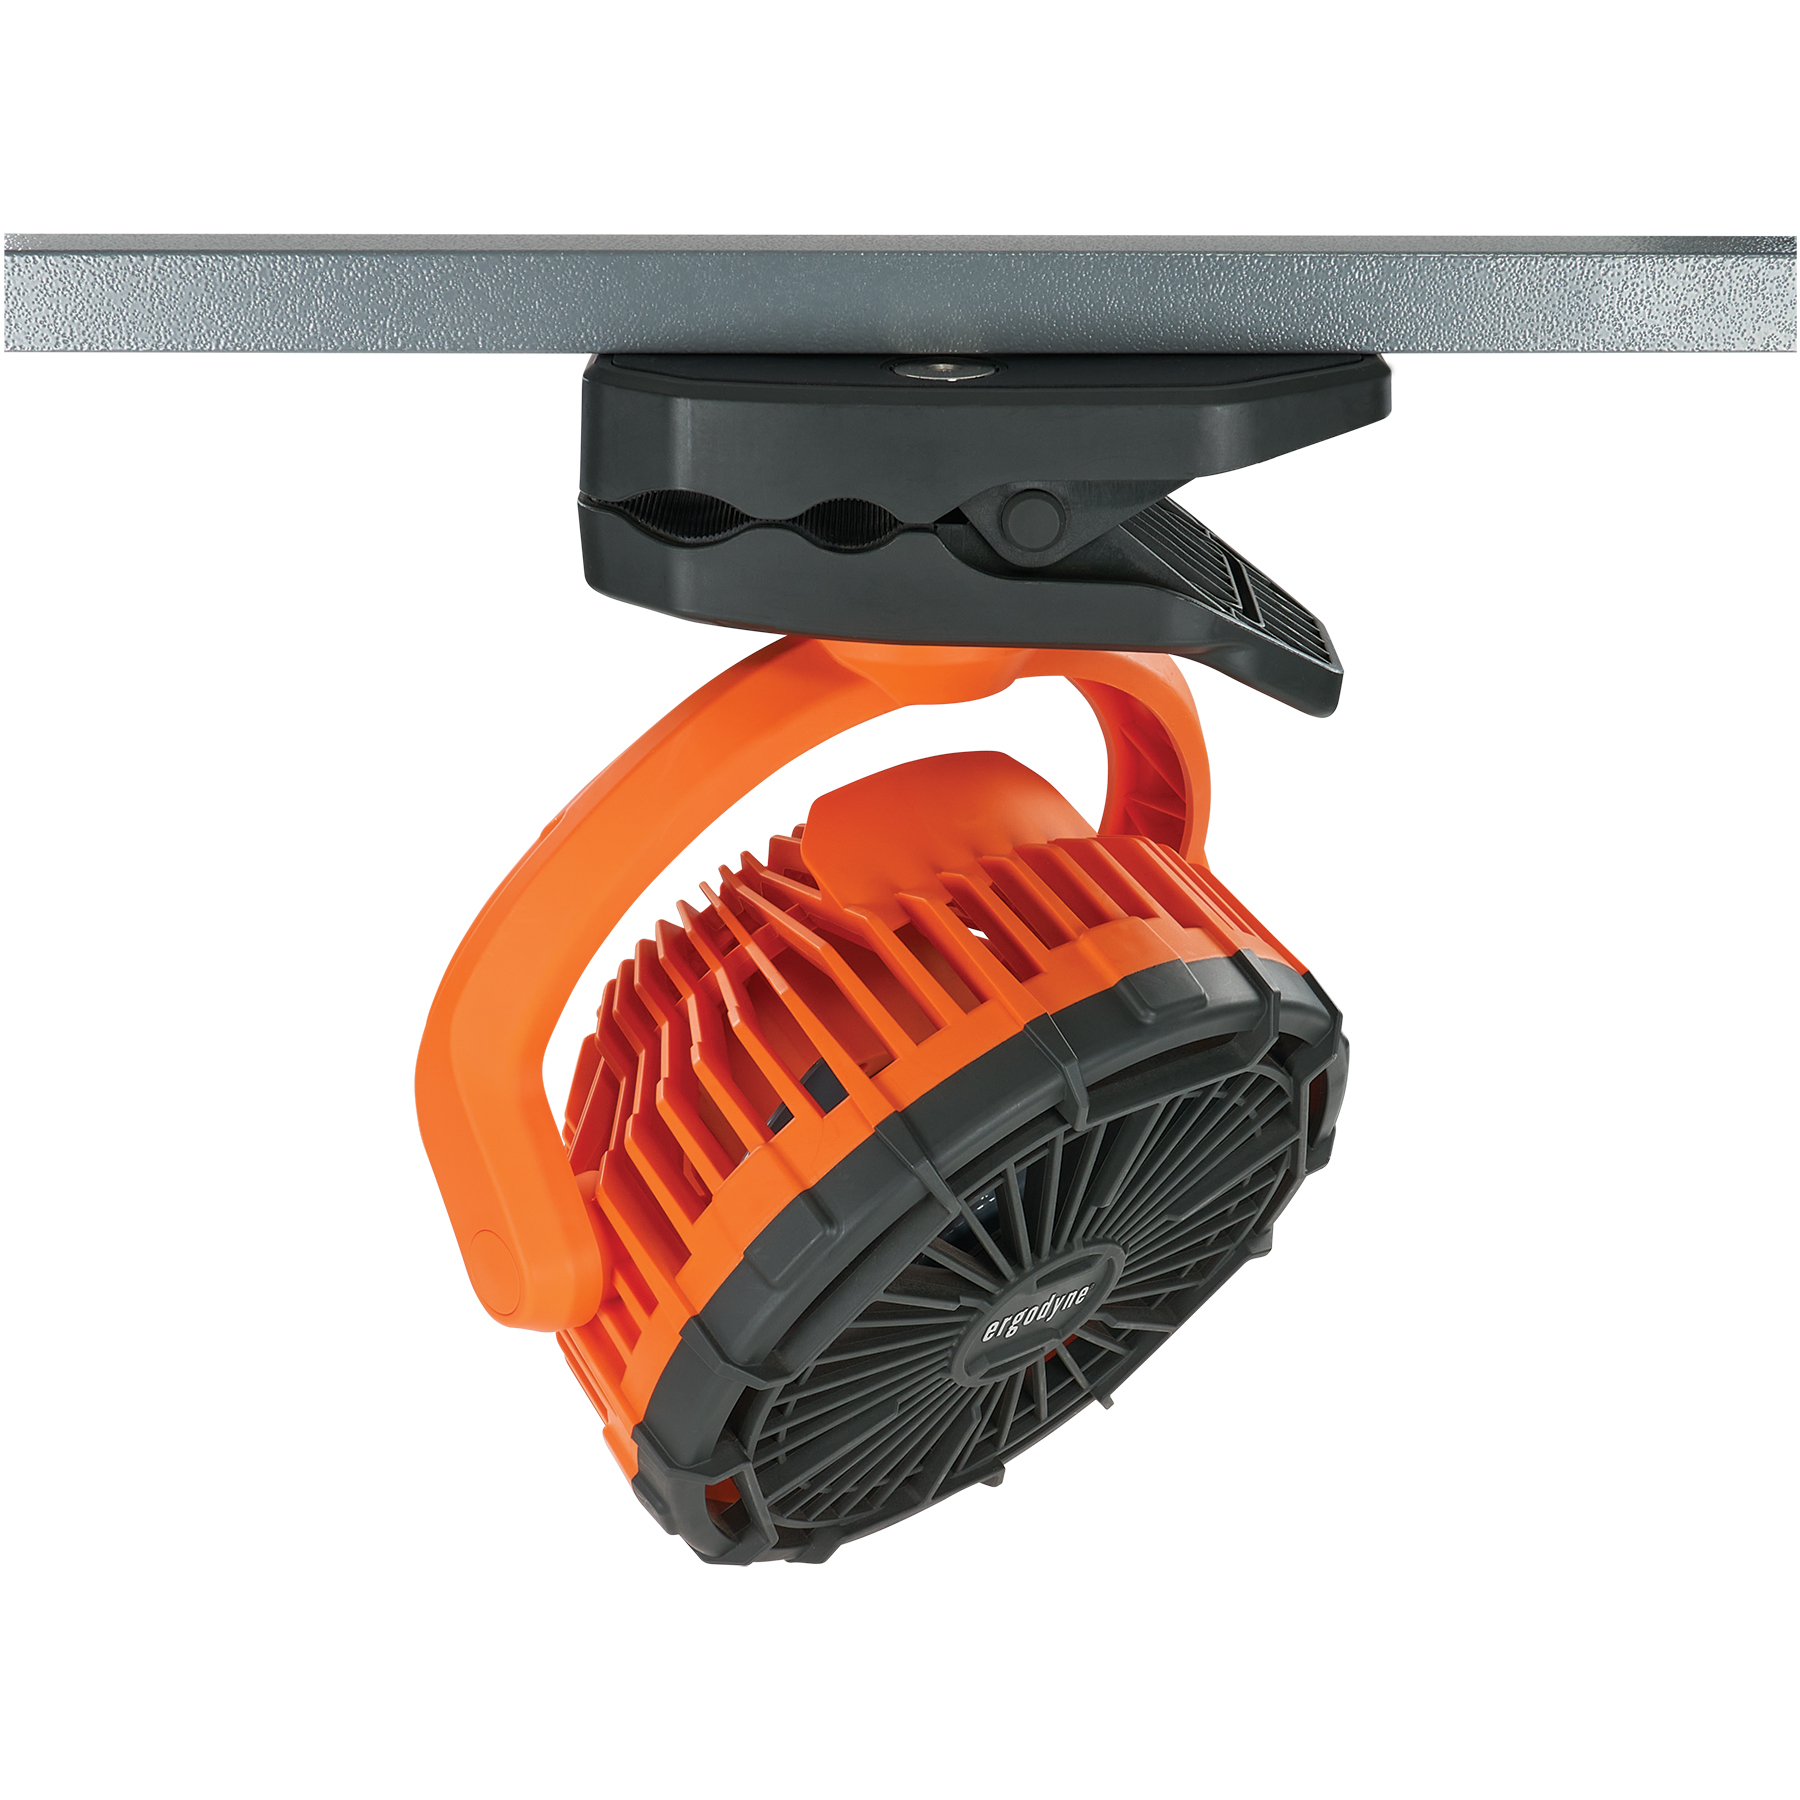 Ergodyne Chill-Its 6090 Rechargeable Portable Jobsite Fan from Columbia Safety